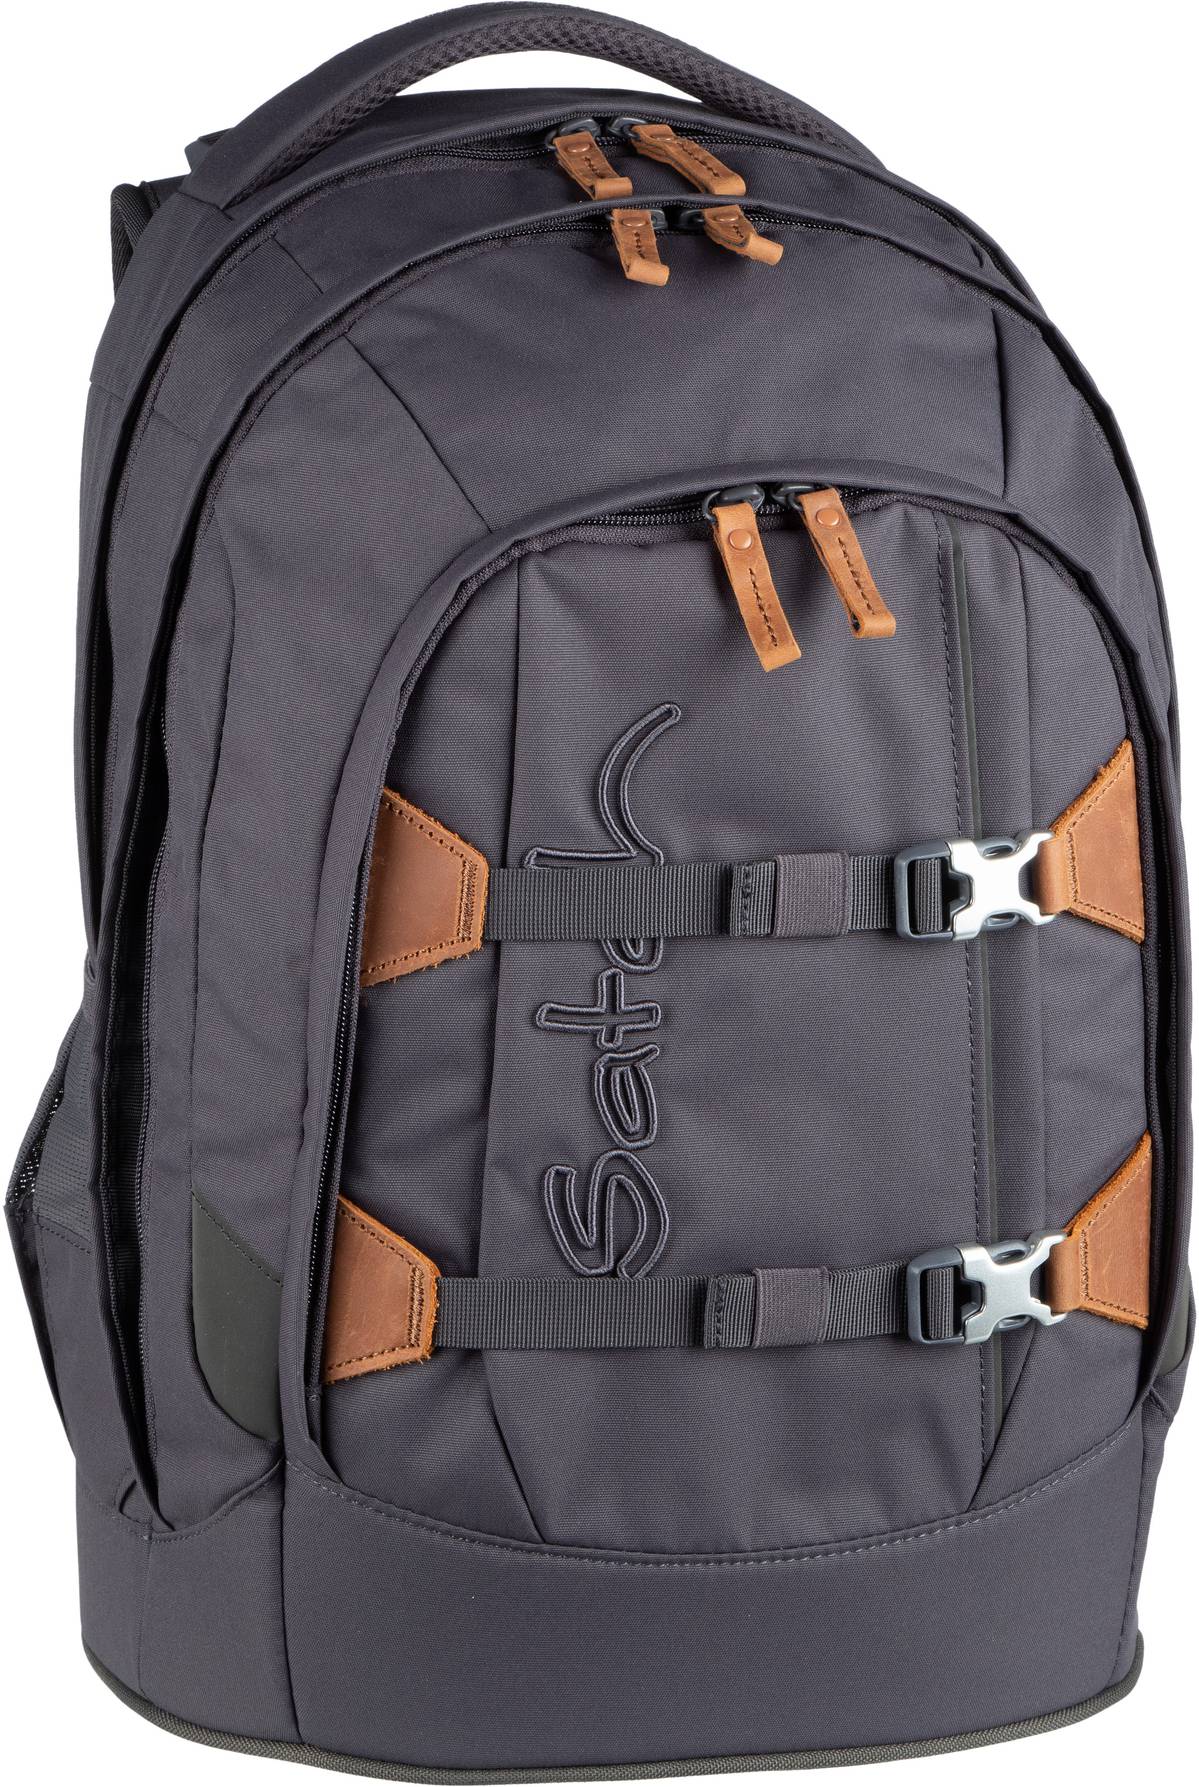 satch satch pack Nordic Edition - Nordic Grey